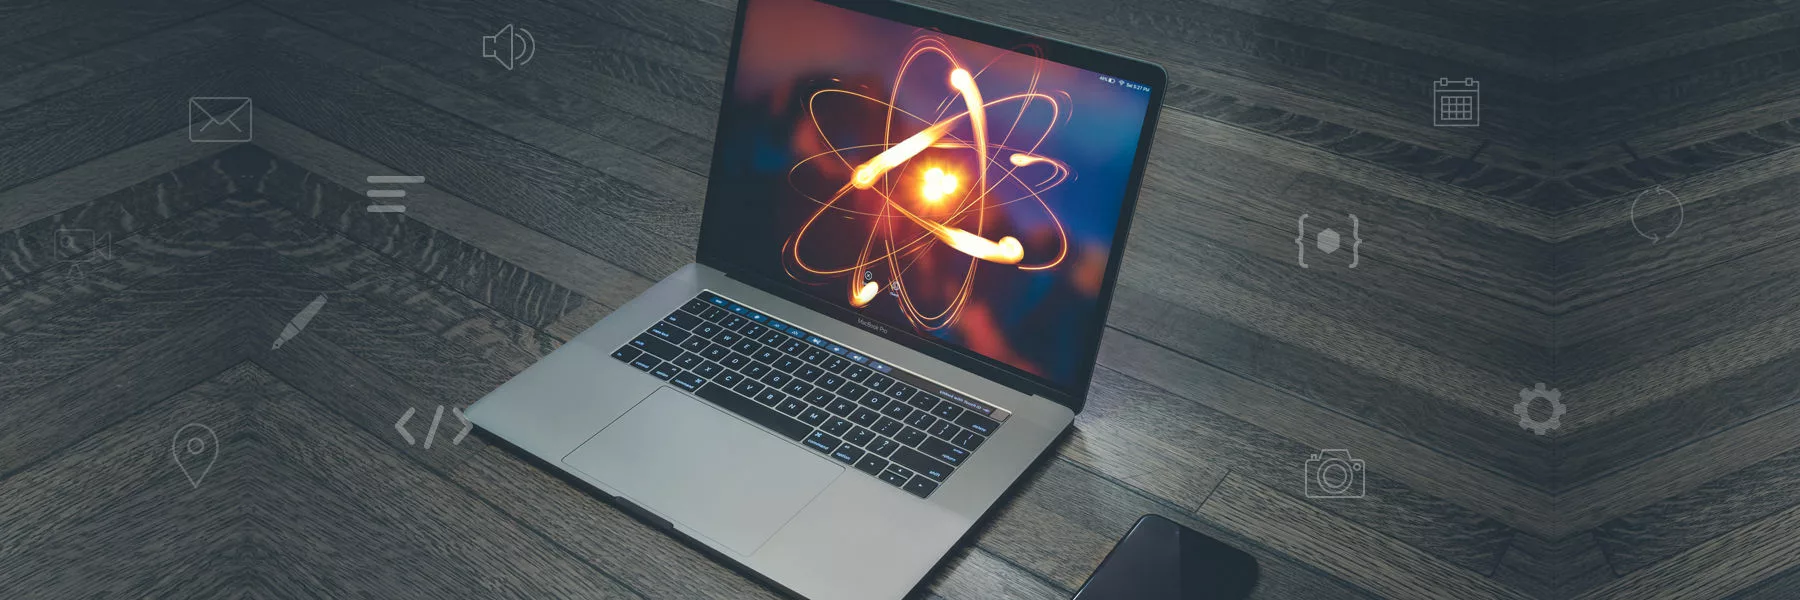 developing a desktop app? here’s why you should opt for electron